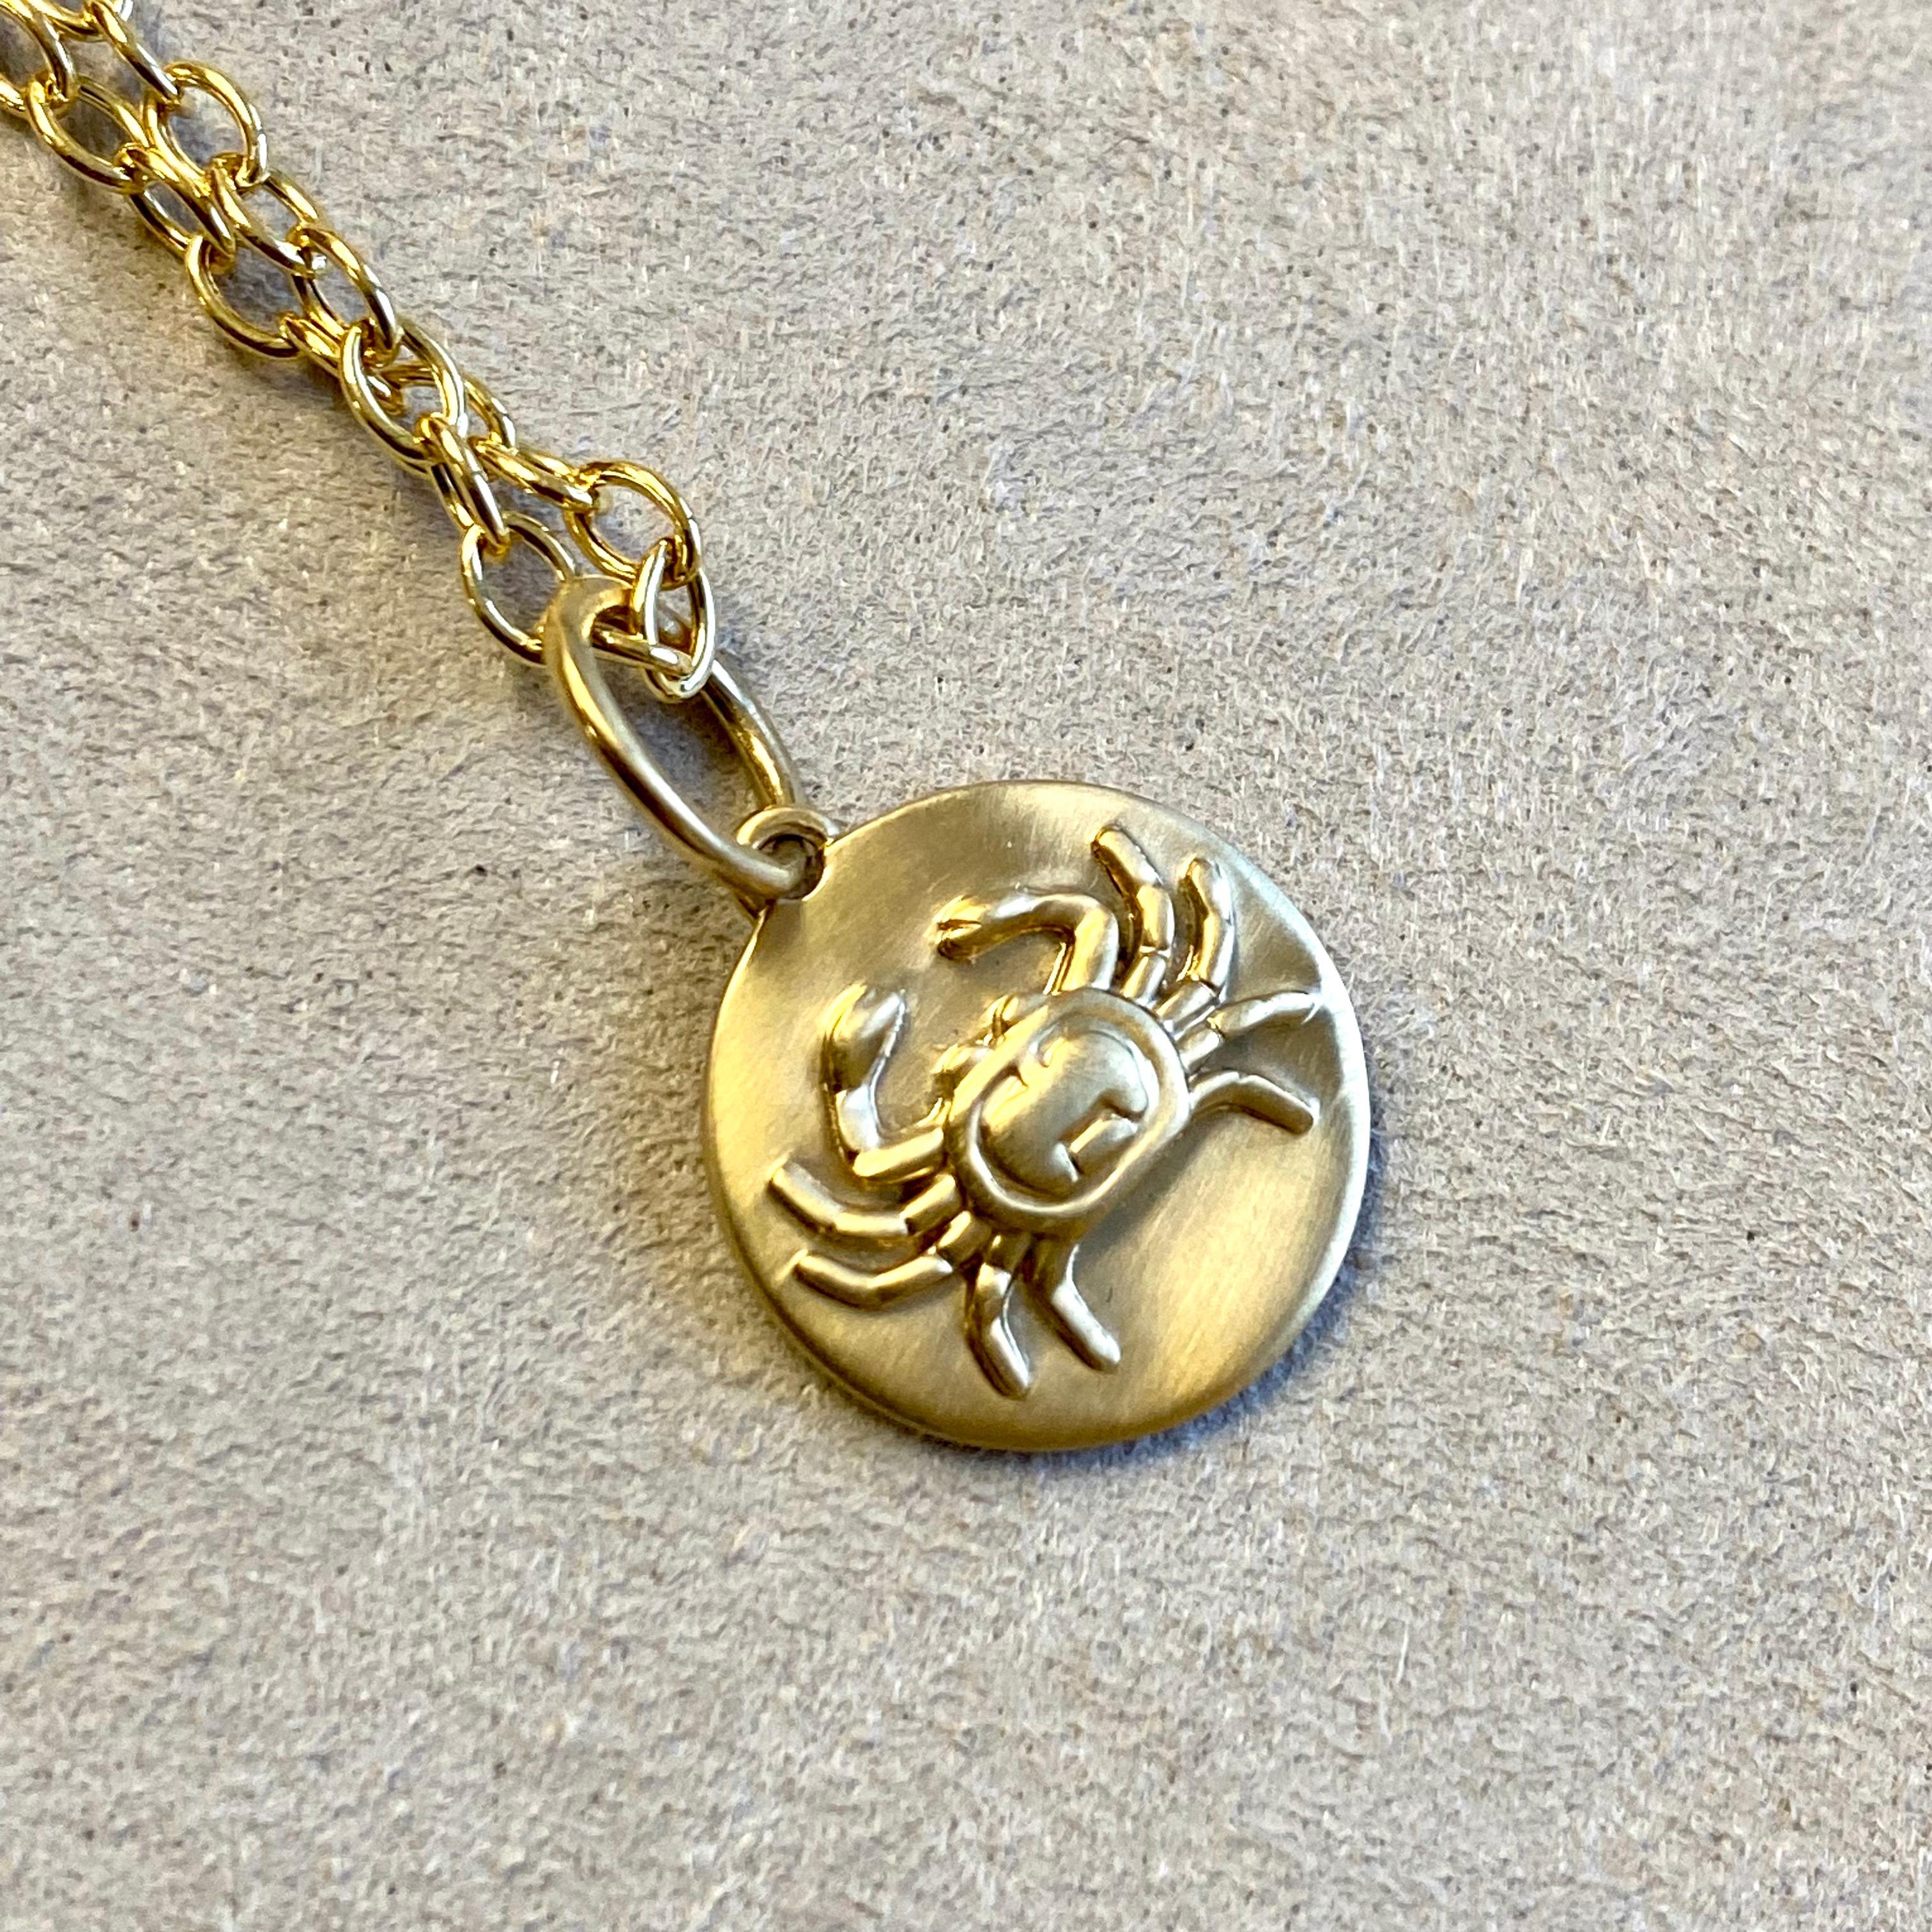 Created in 18 karat yellow gold
Cancer zodiac pendant
Chain sold separately 
Limited edition

Crafted with 18 karat yellow gold, this limited edition Cancer zodiac pendant truly exudes sophistication. Chain sold separately.

About the Designers ~